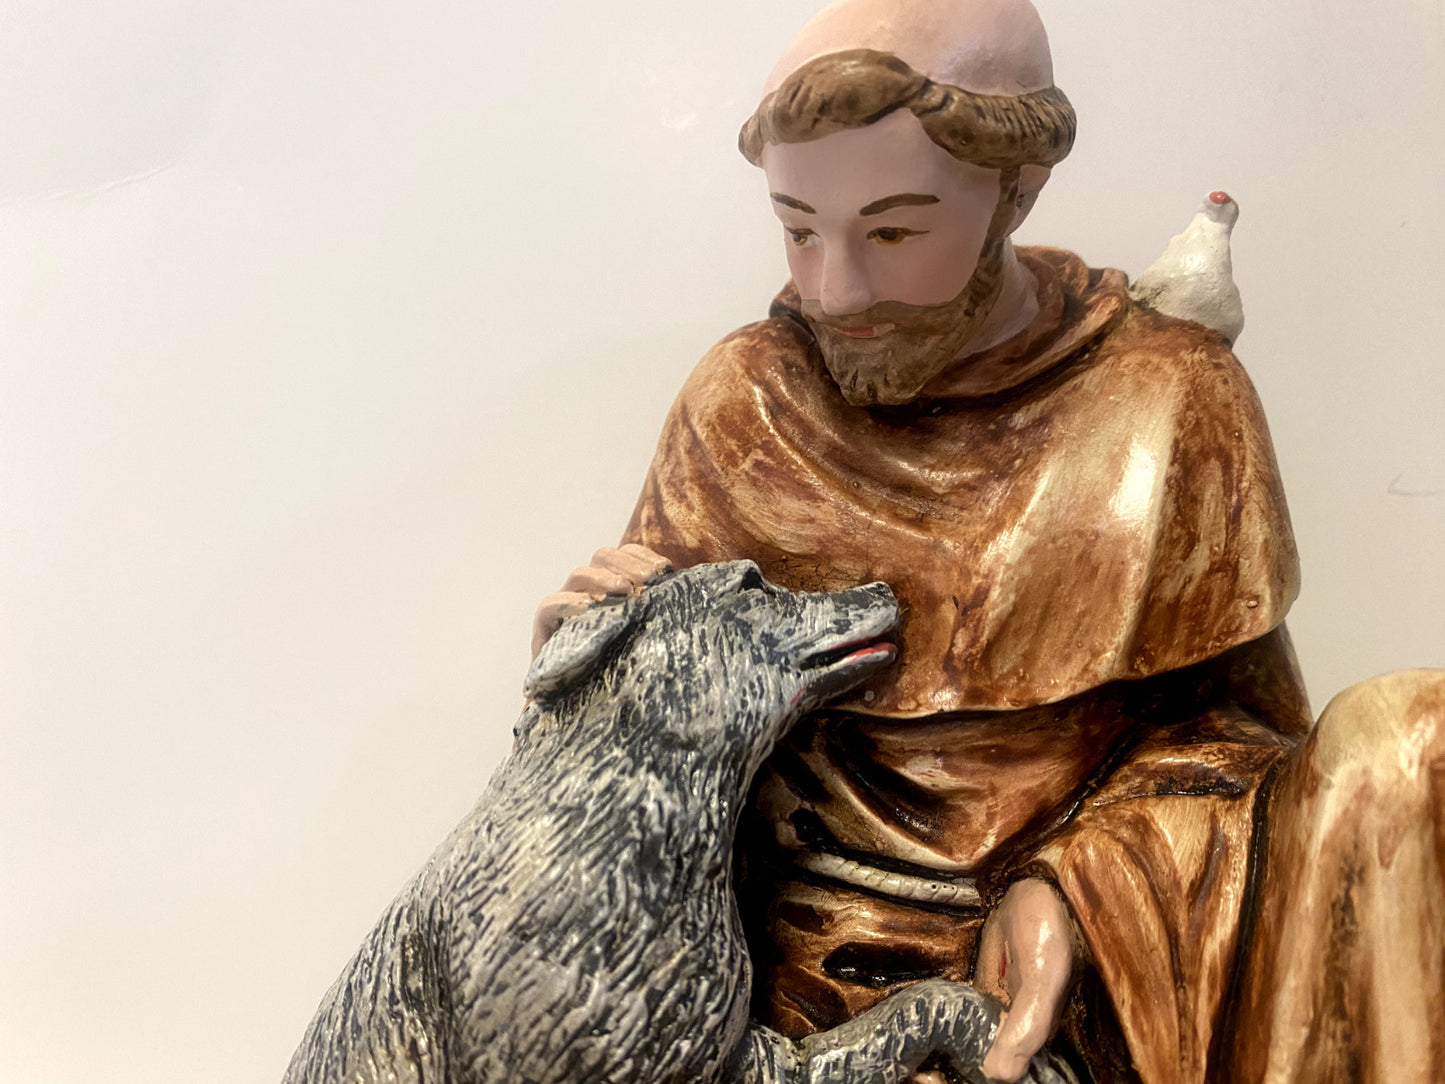 Saint Francis of Assisi with Wolf 6.5" Statue, New. from Colombia - Bob and Penny Lord